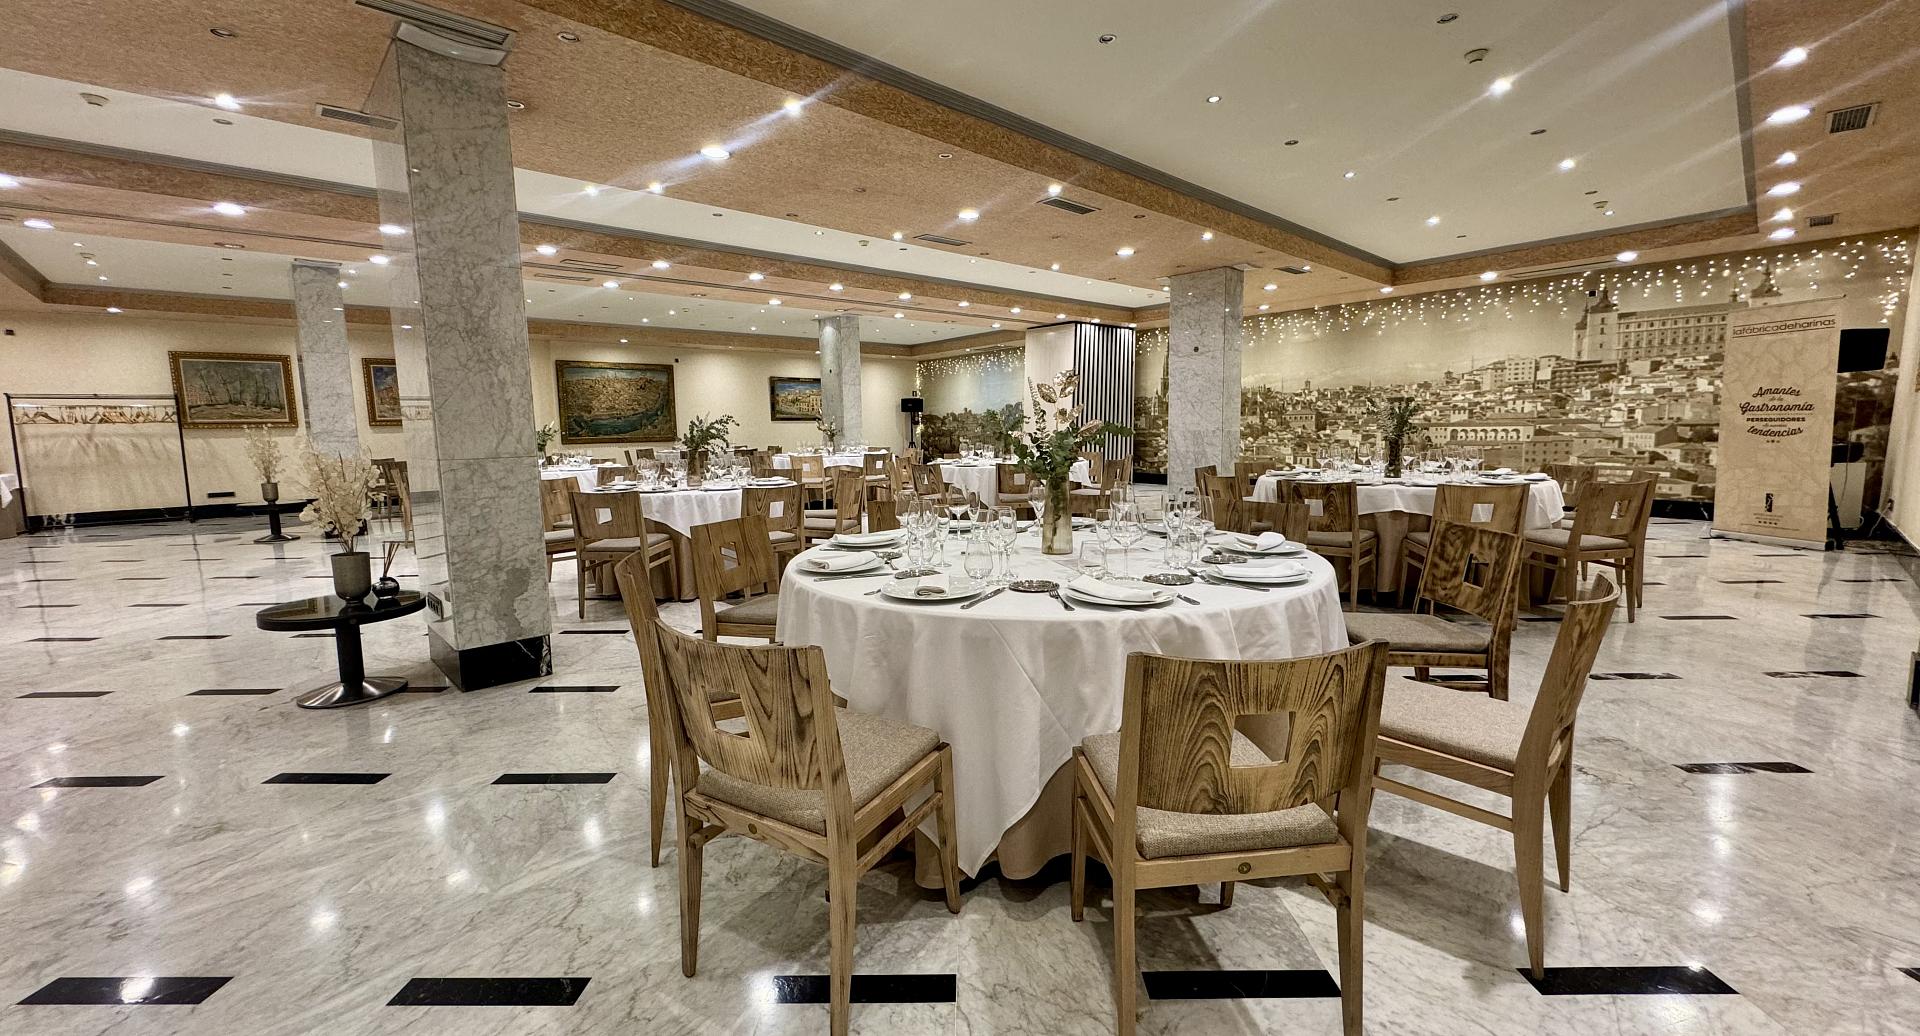 Rooms for events at the Hotel San Juan de los Reyes